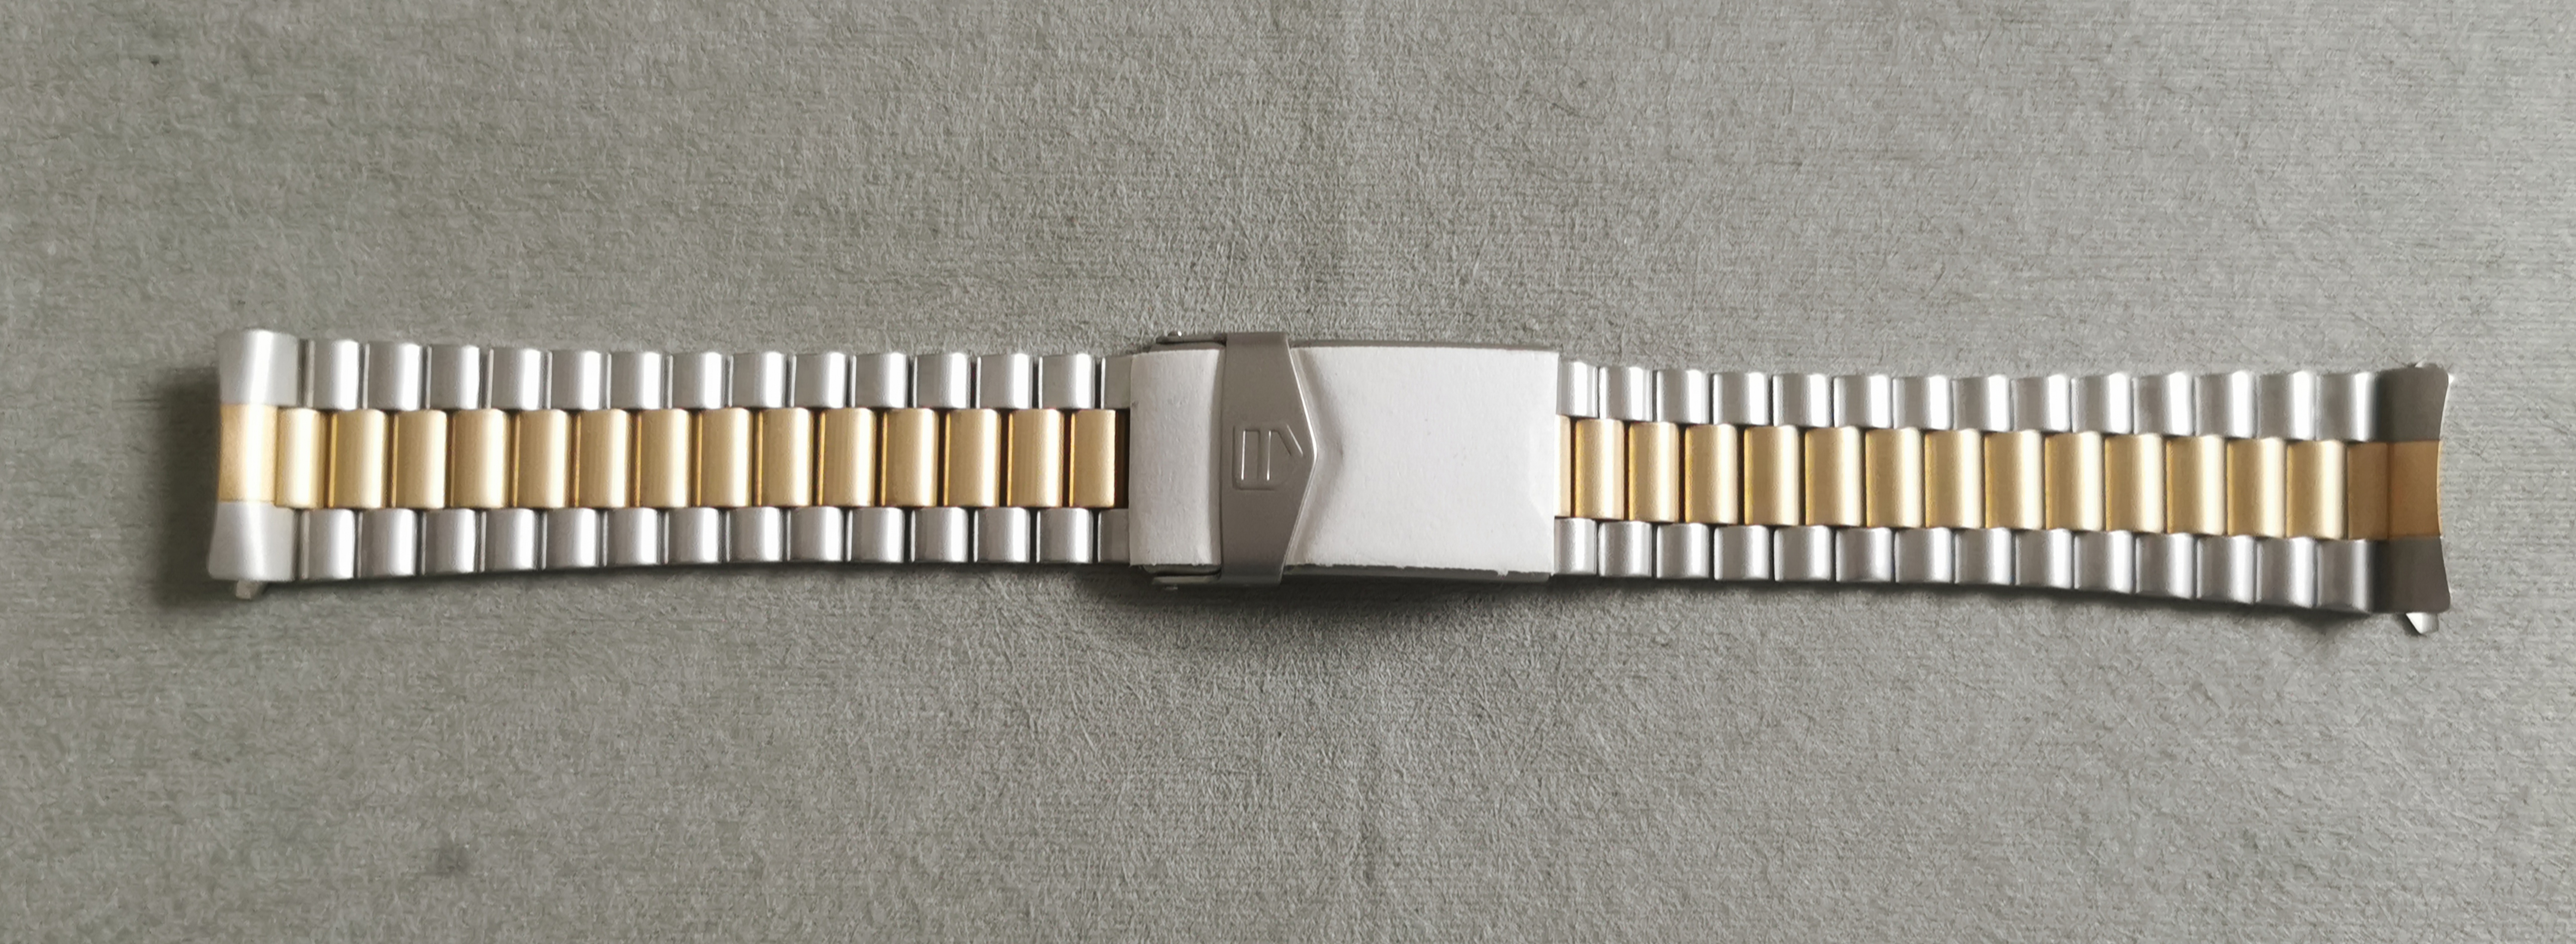 TAG Heuer 2000 326/31G 2-TONE NEW STYLE GOLD PLATED + STAINLESS STEEL FULL BRACELET MM 20 NOS | San Giorgio a Cremano